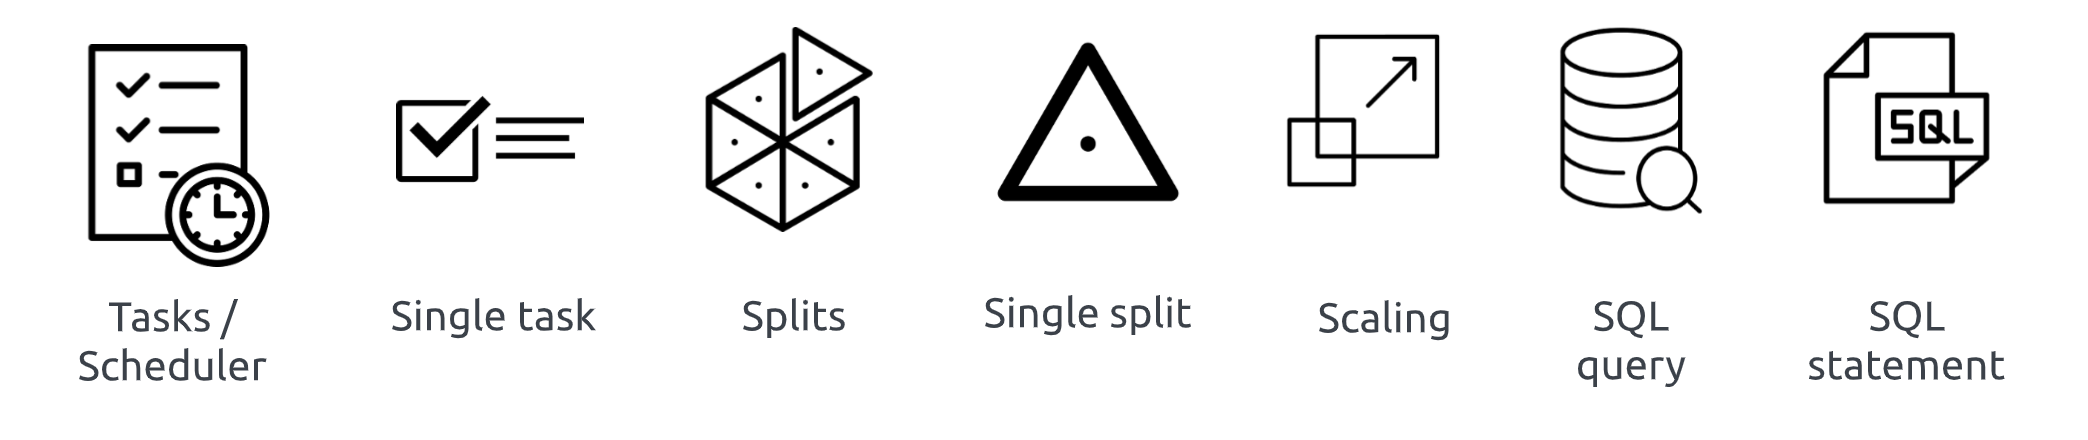 Icons depicting miscellaneous concepts